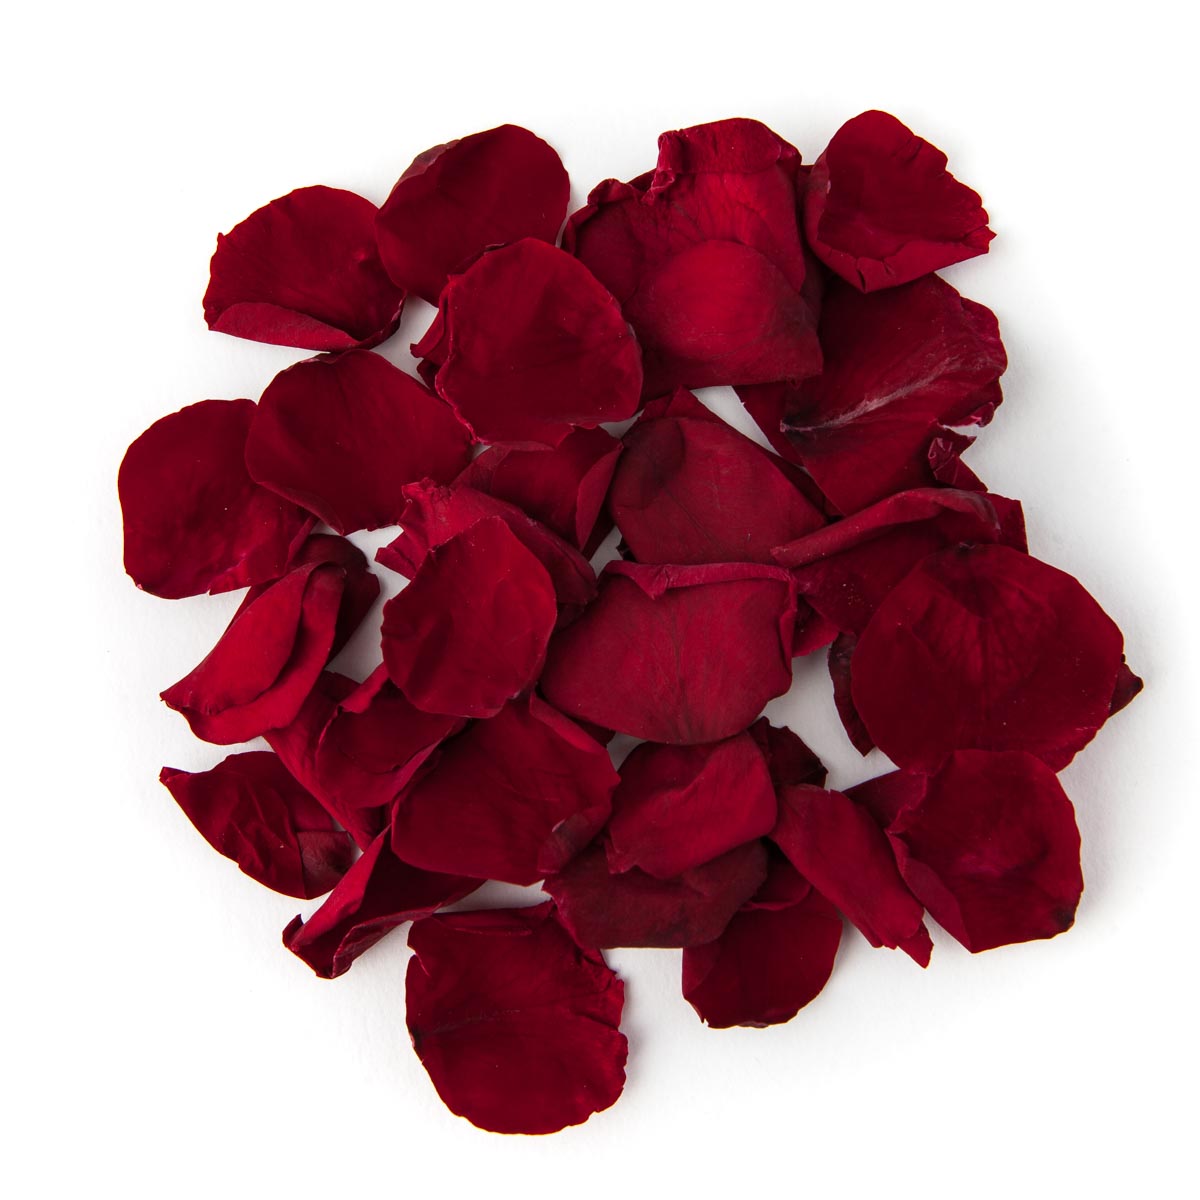 What is Rose petals?, Benefits, Uses and Side effects